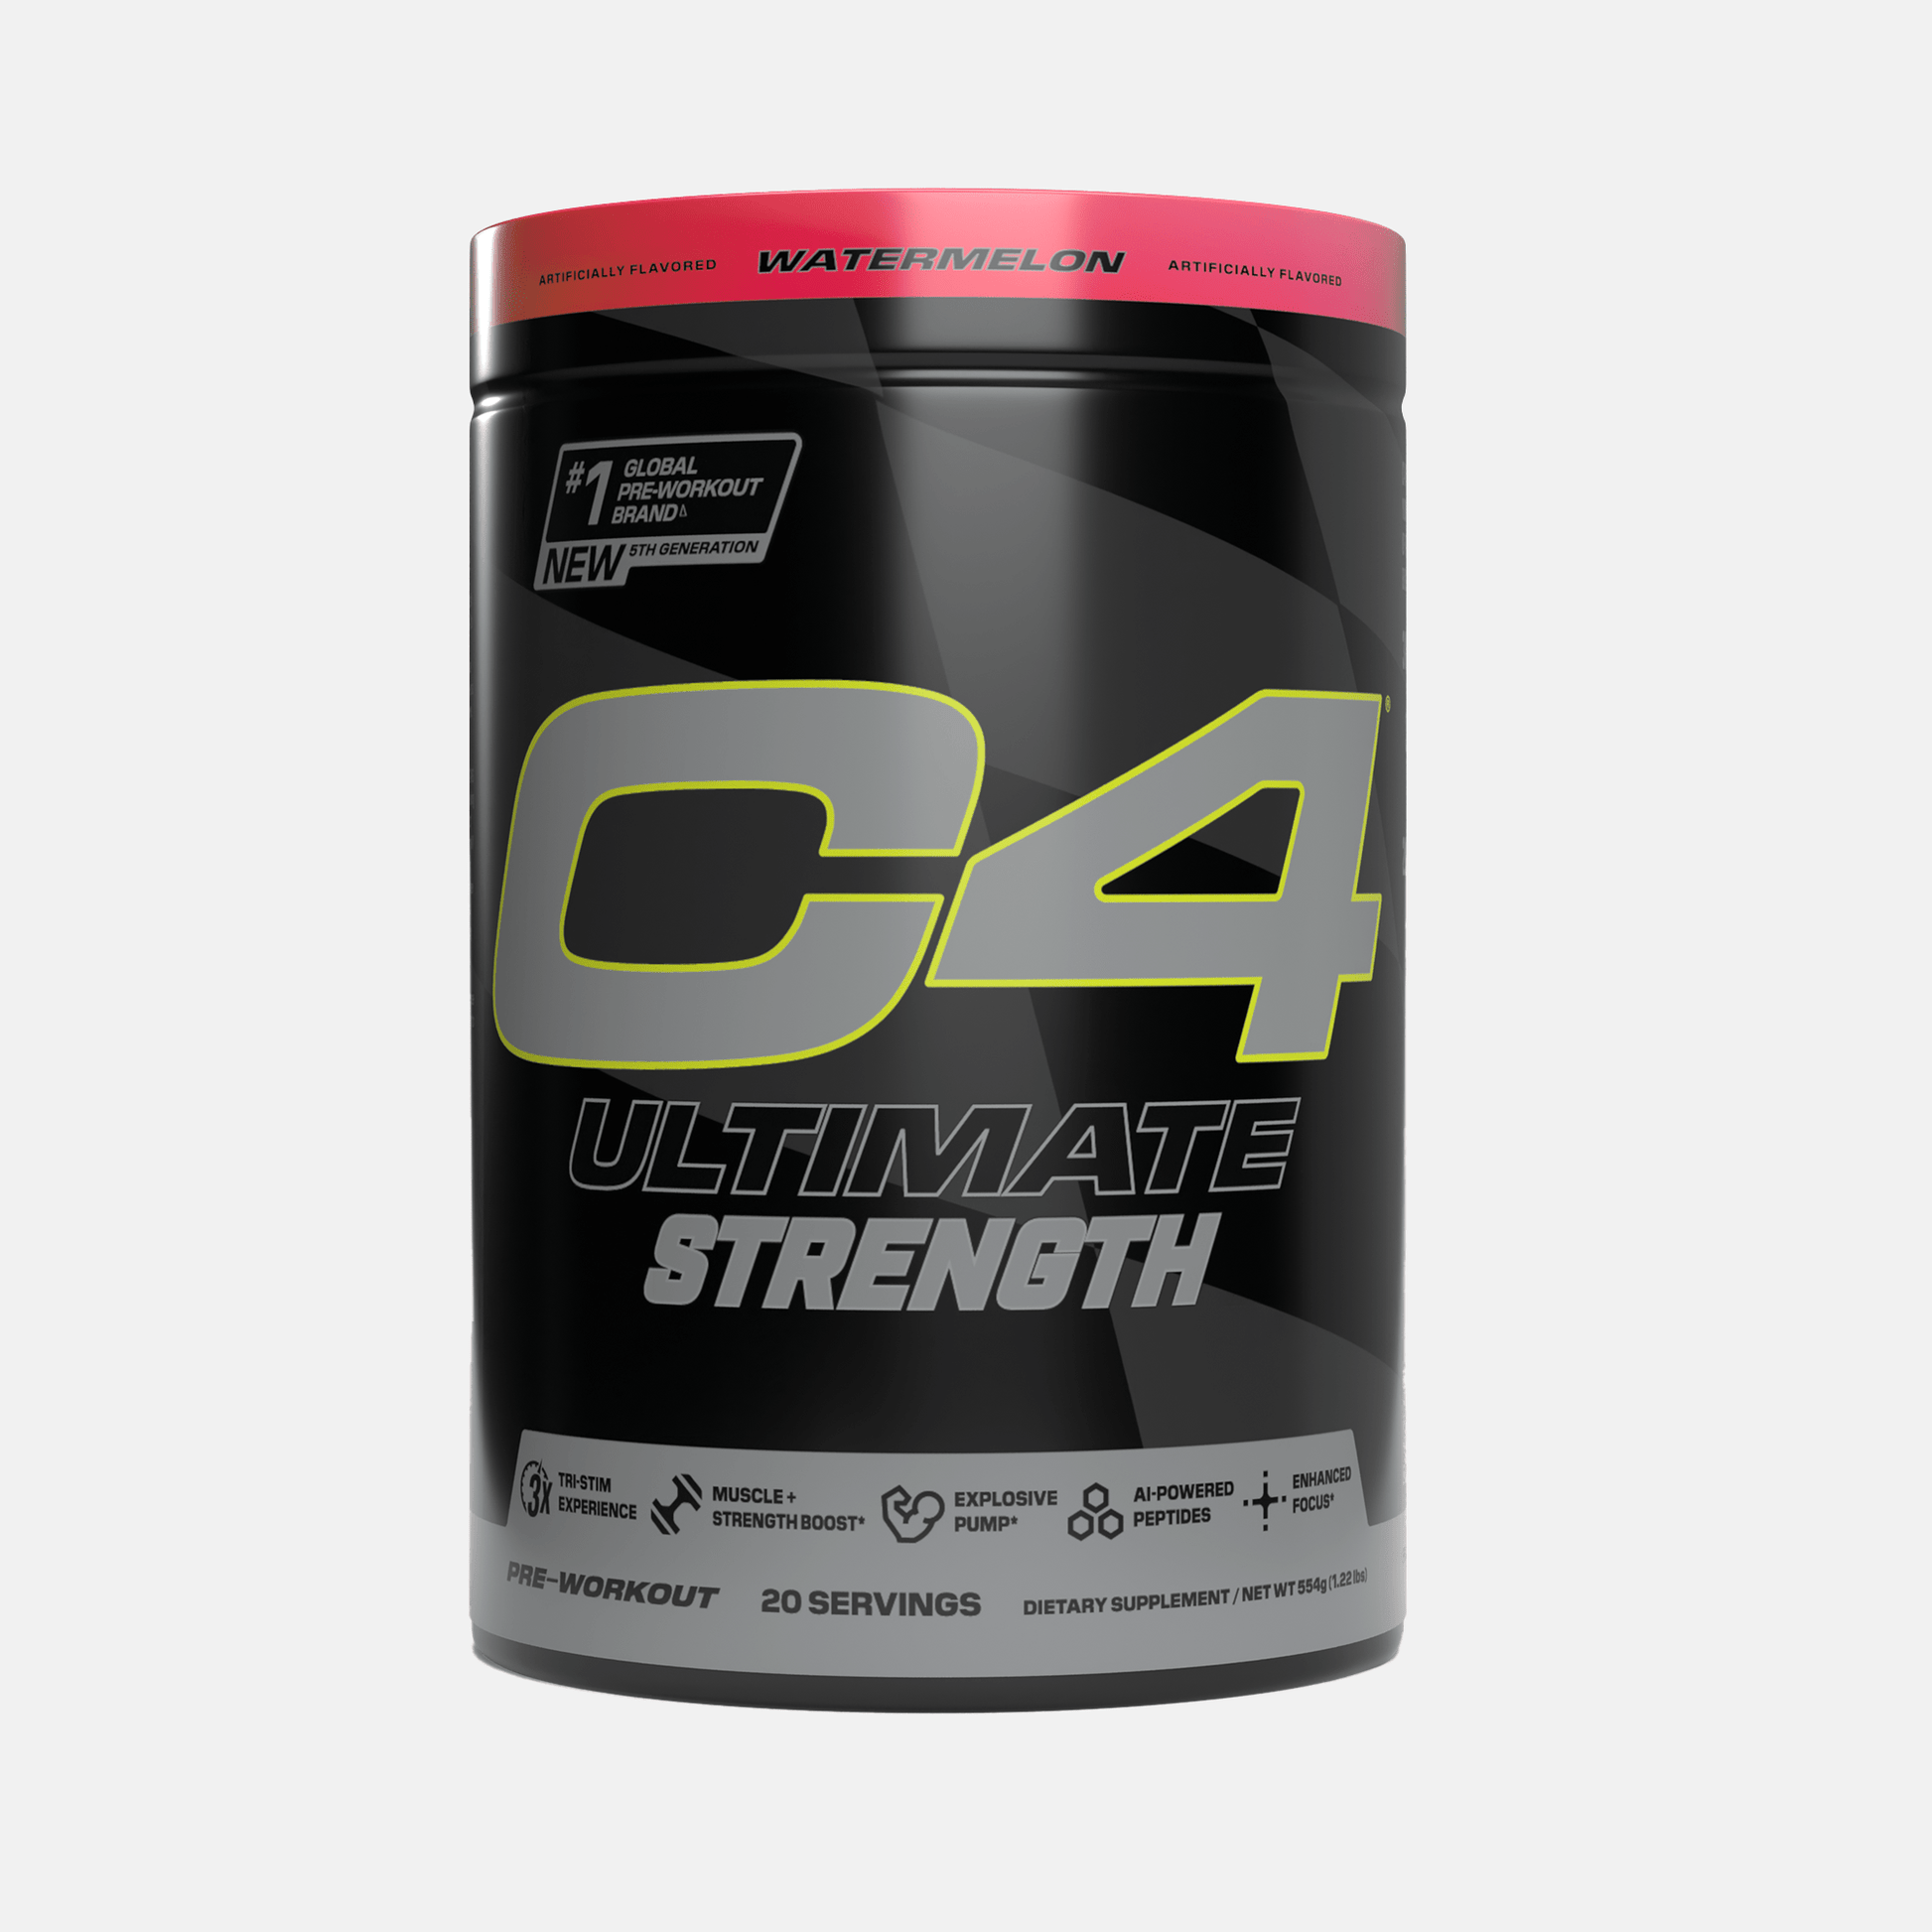 C4 Ultimate Strength Pre Workout Powder View 2